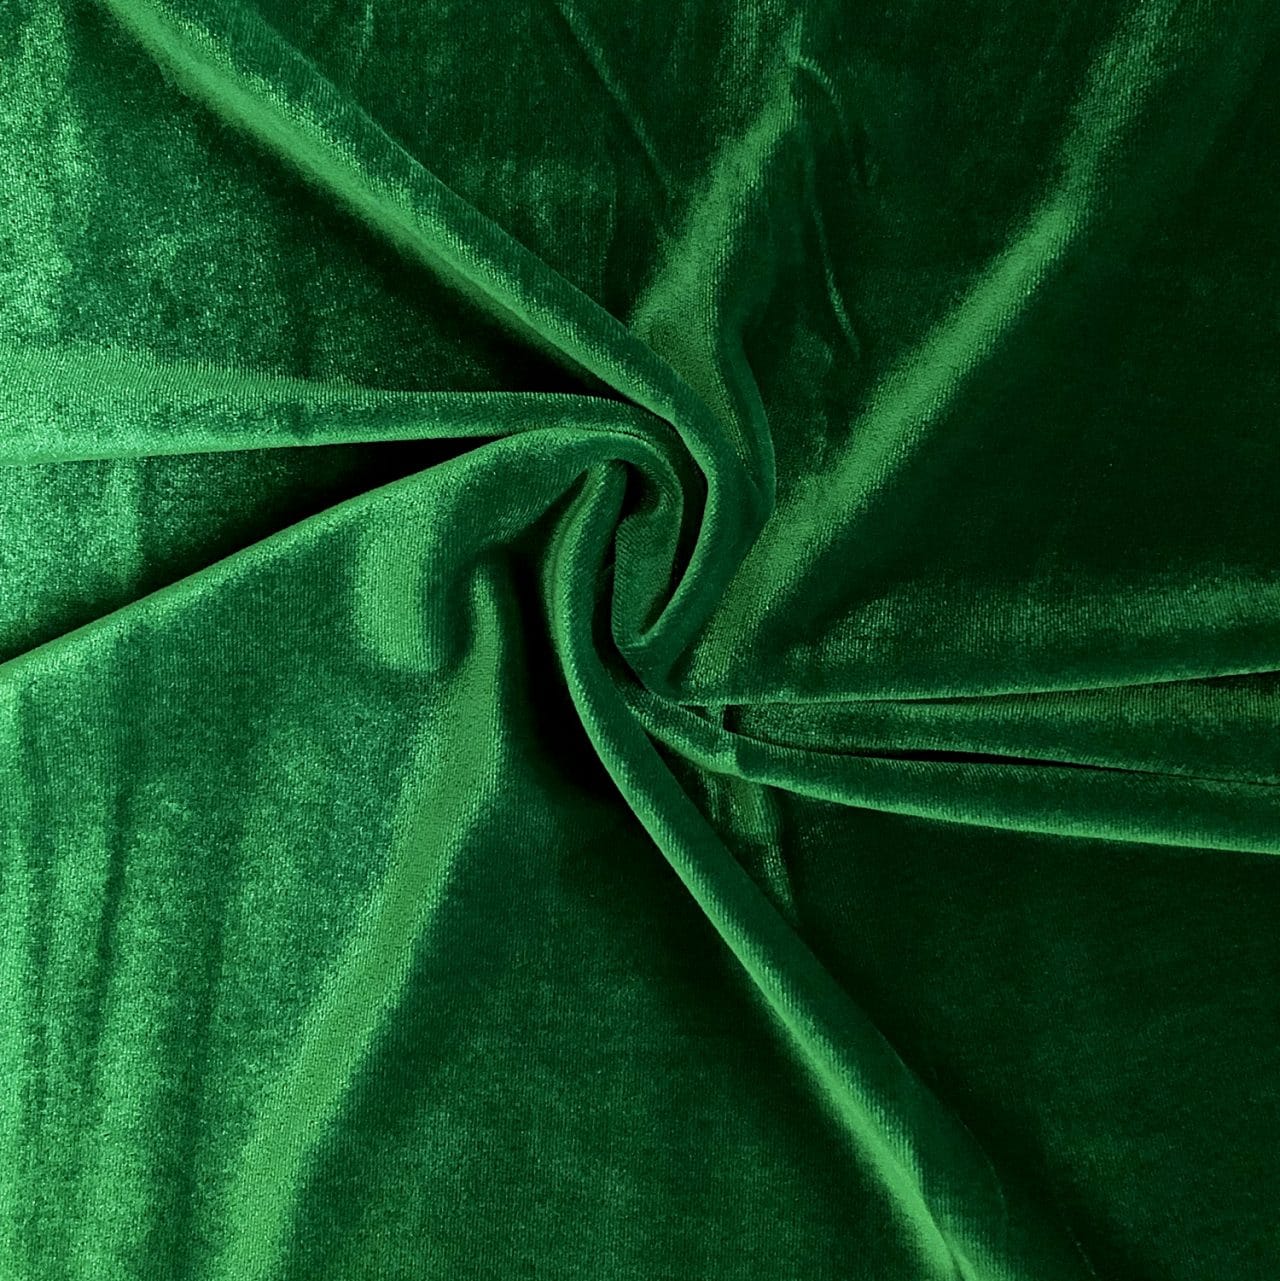 Solid Green Velvet Fabric - Fabric By The Yard - Solid Stone Fabrics, Inc.